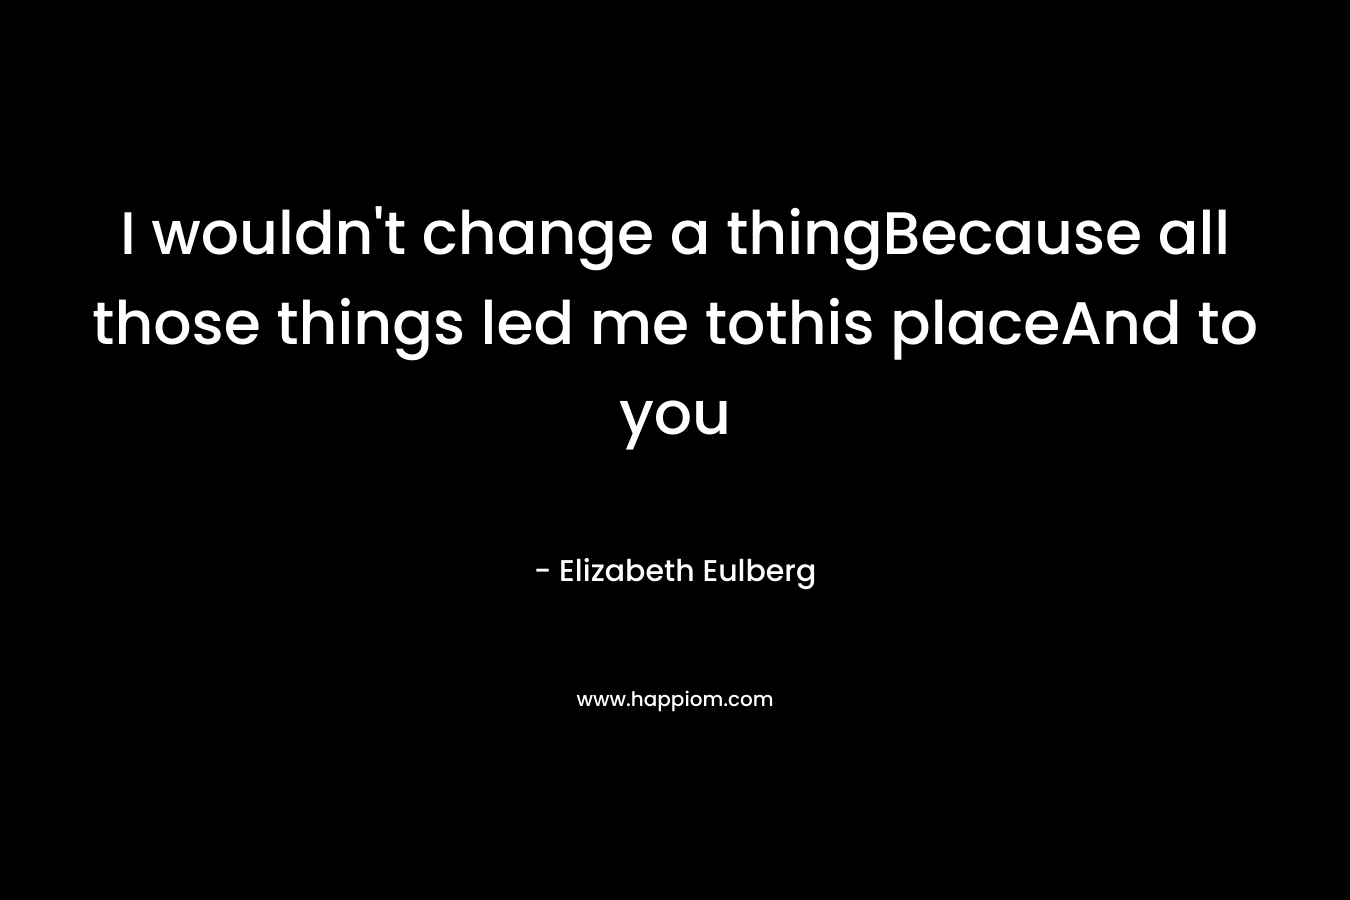 I wouldn’t change a thingBecause all those things led me tothis placeAnd to you – Elizabeth Eulberg